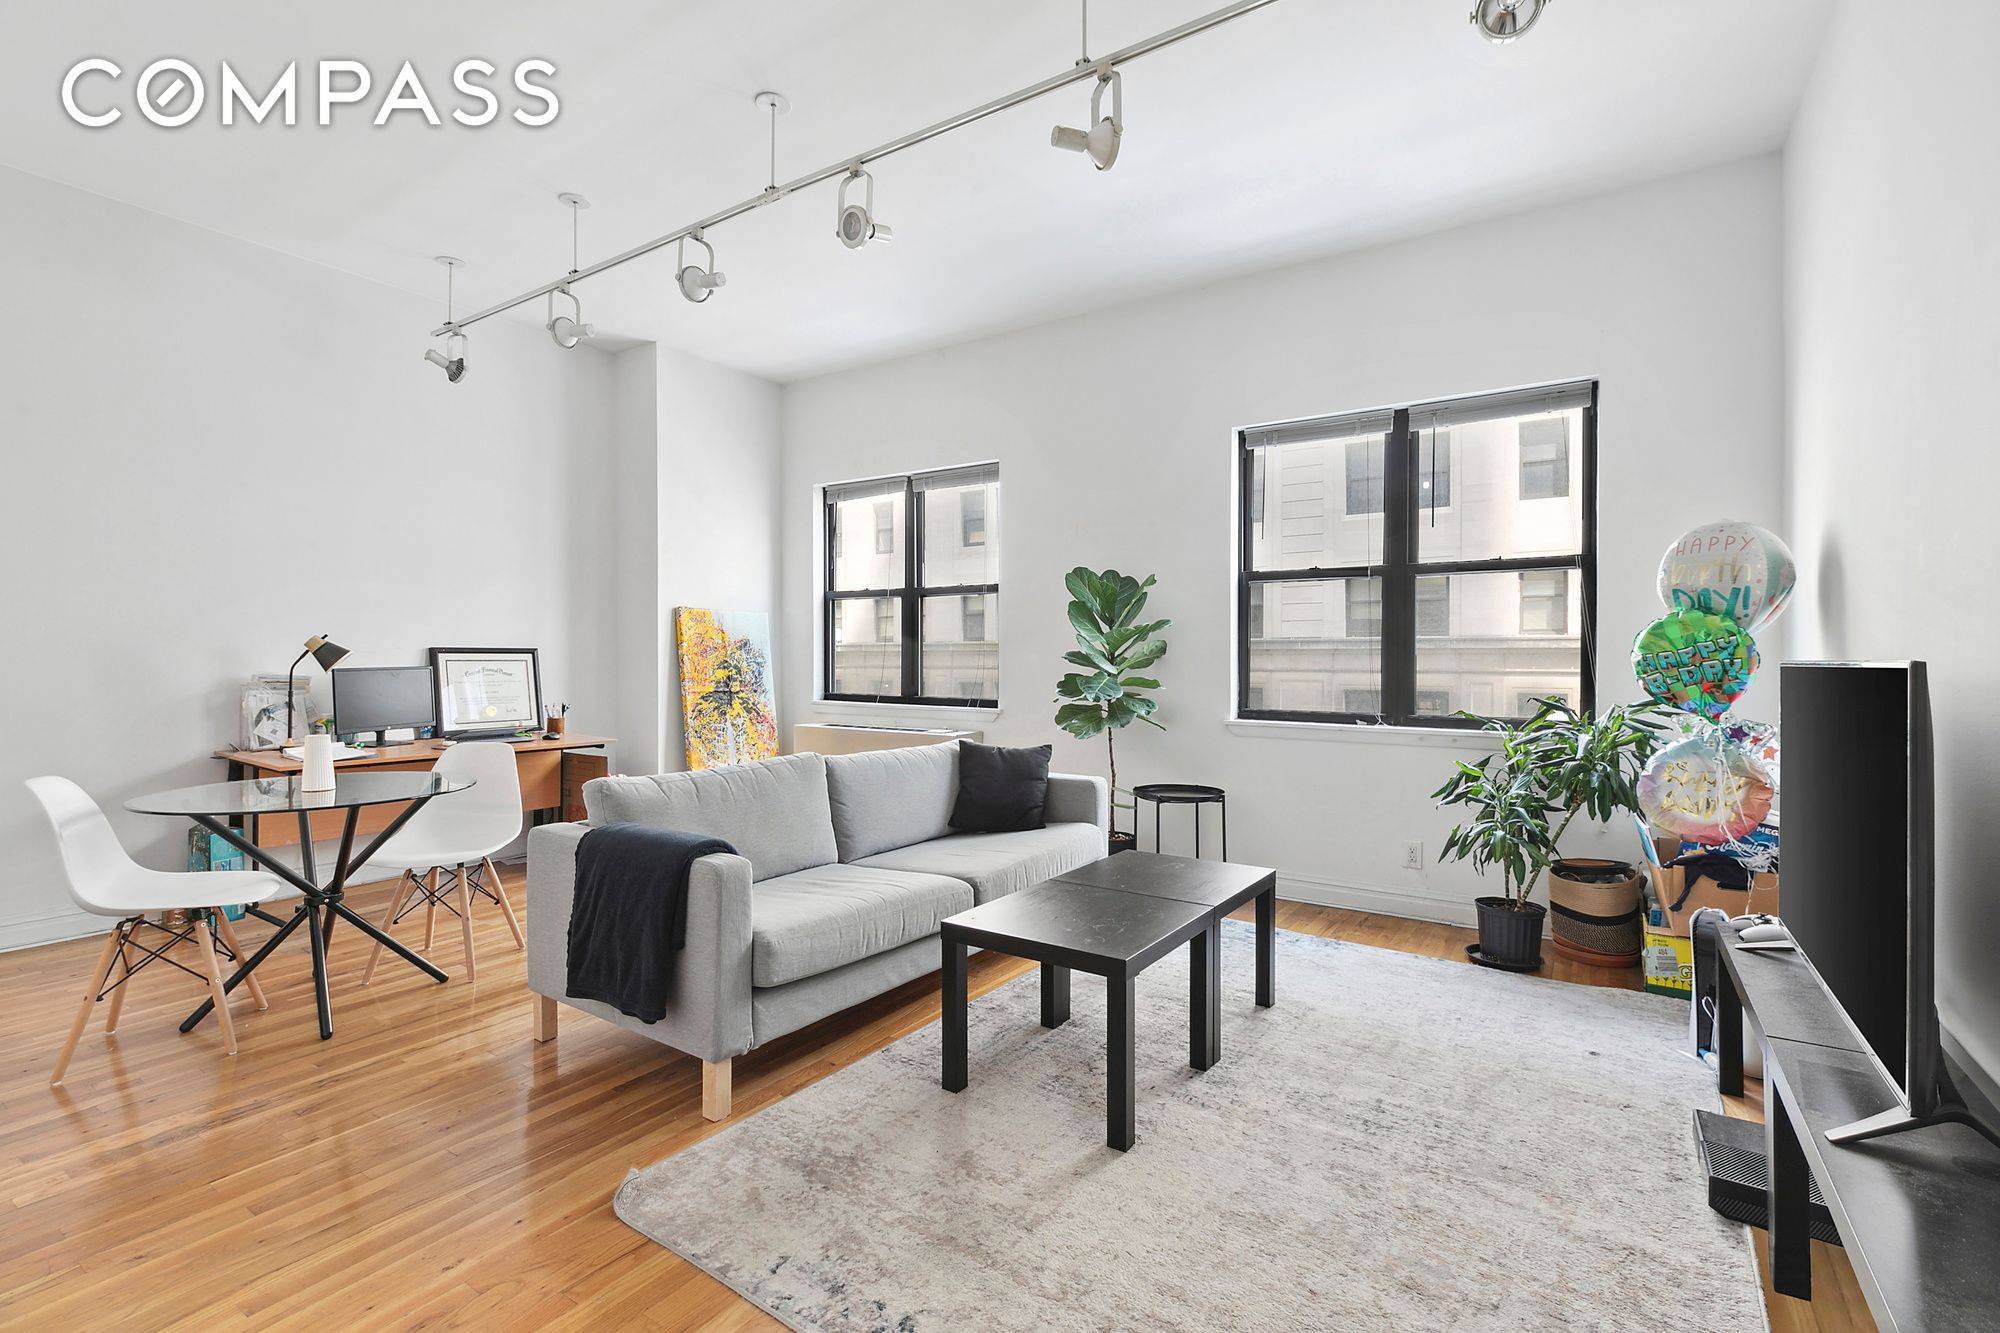 Centrally located and super spacious, this two bedroom loft with high ceilings, oversized windows and hardwood floors will be available beginning September.